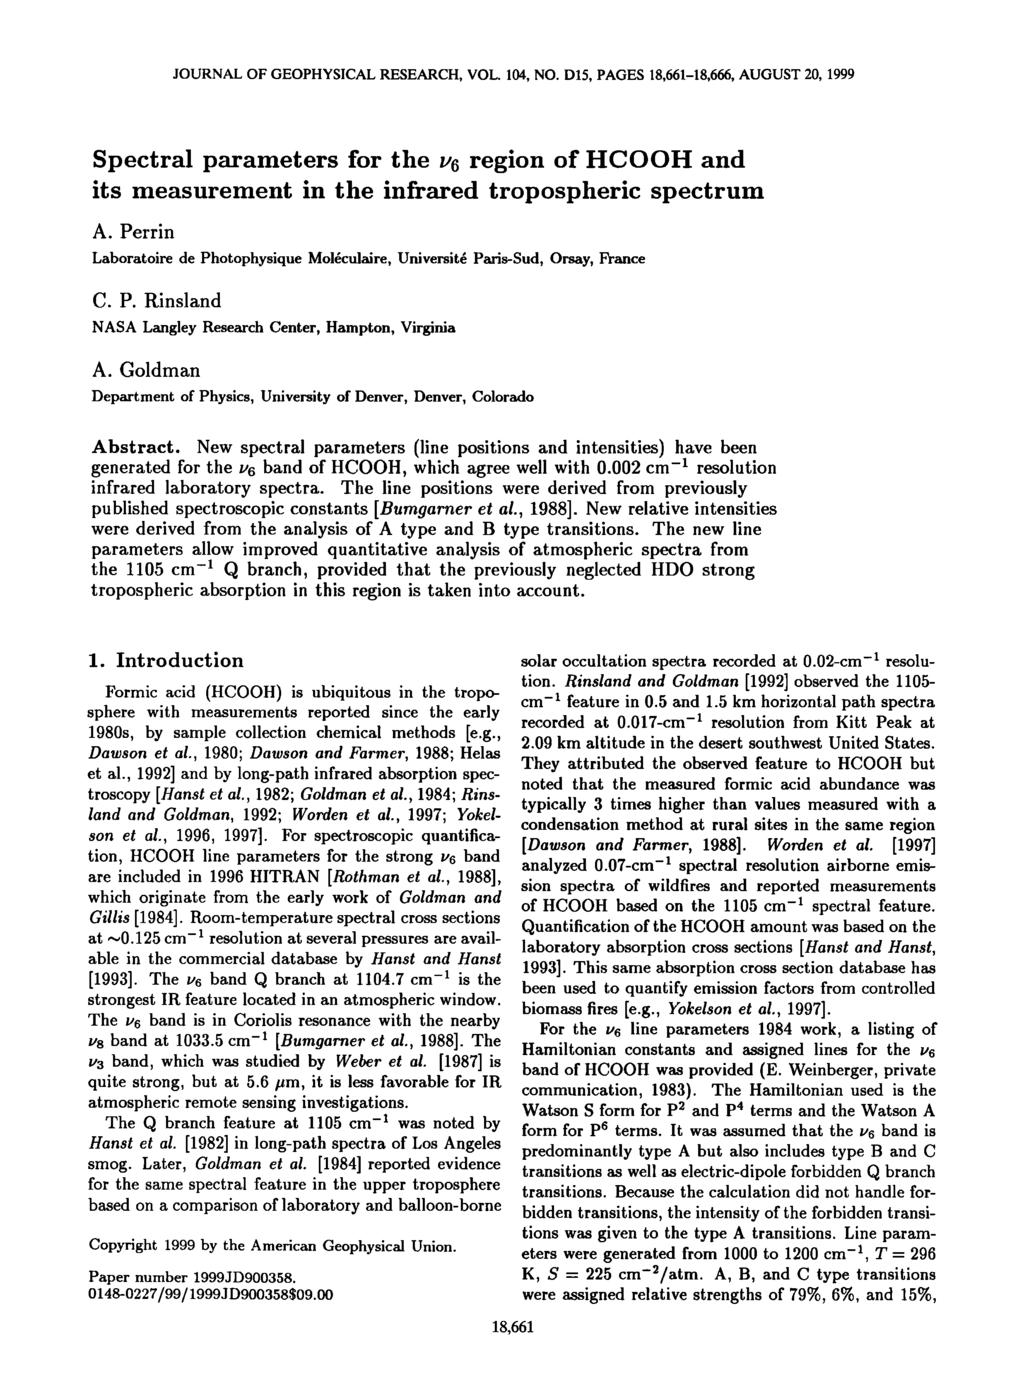 JOURNAL OF GEOPHYSICAL RESEARCH, VOL. 104, NO. D15, PAGES 18,661-18,666, AUGUST 20, 1999 Spectral parameters for the region of HCOOH and its measurement in the infrared tropospheric spectrum A.